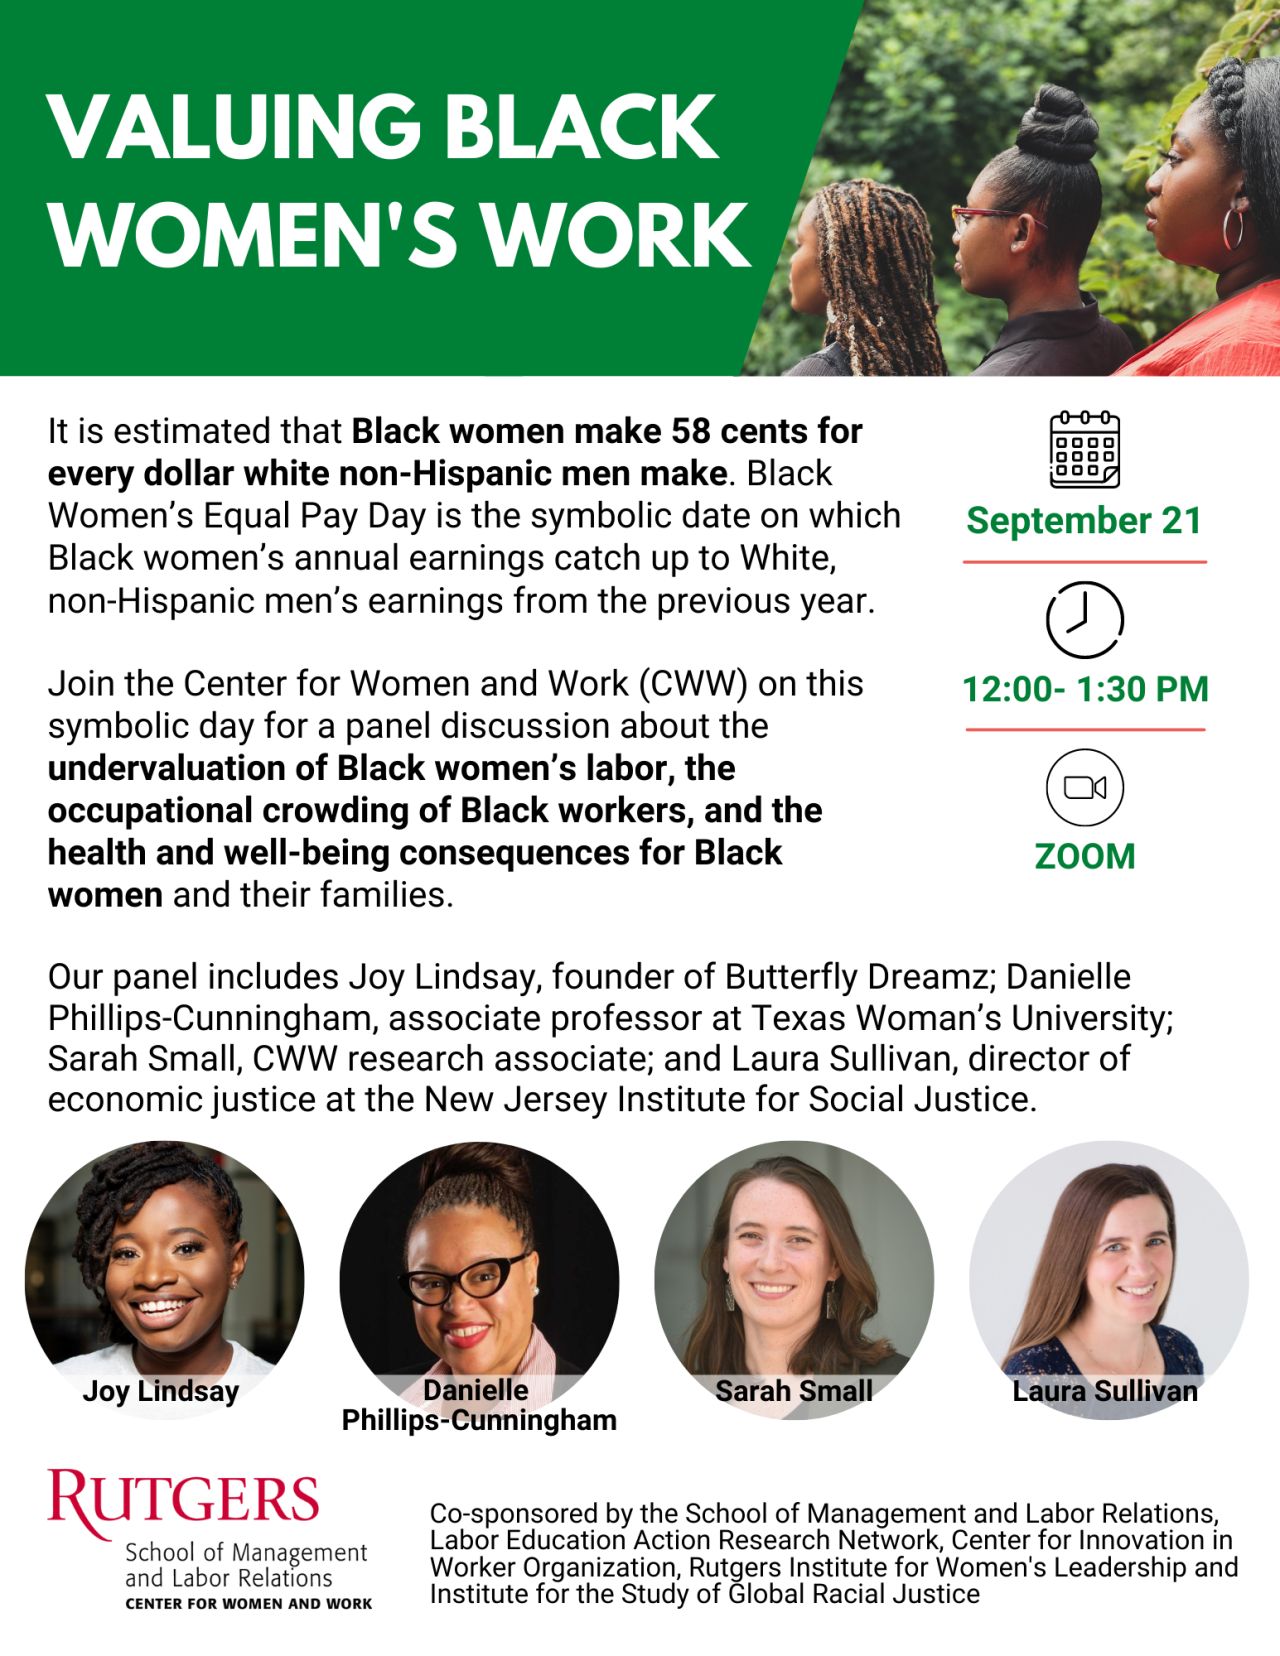 Image of Black Women's Equal Pay Day Event